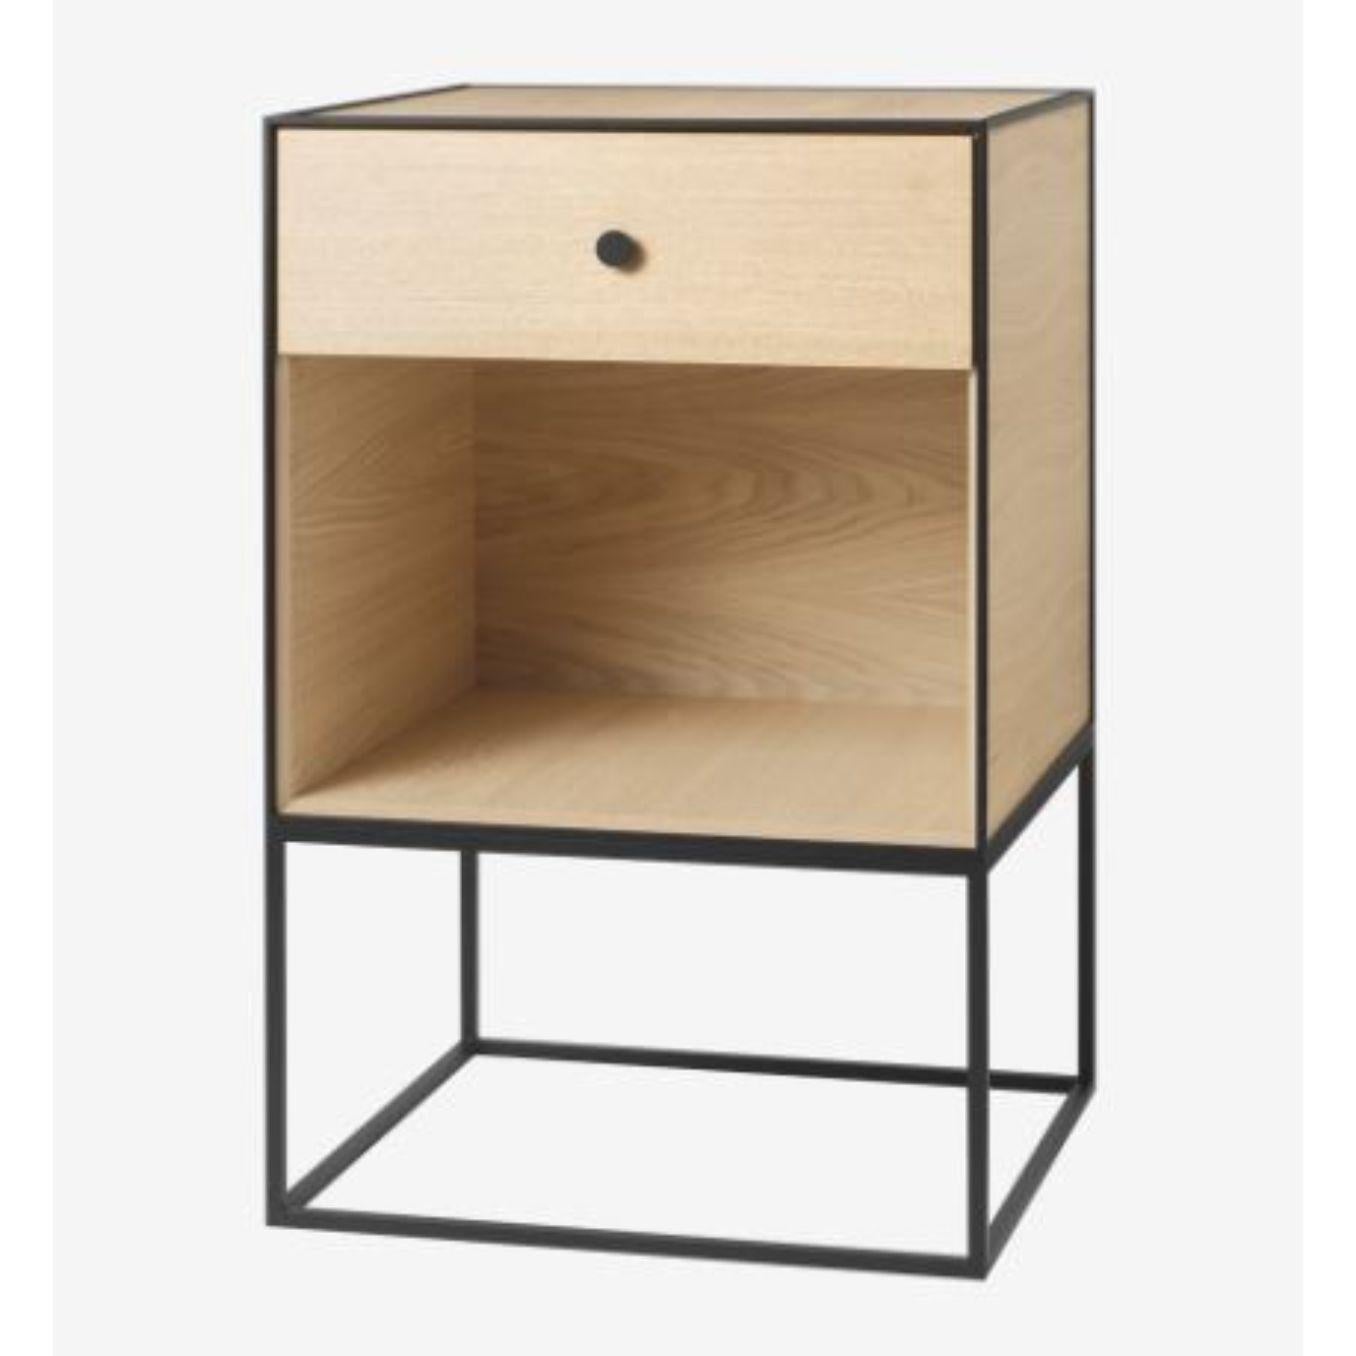 49 oak frame sideboard with 1 drawer by Lassen
Dimensions: W 49 x D 42 x H 77 cm 
Materials: Finér, Melamin, Melamine, Metal, Veneer, Oak
Also available in different colors and dimensions. 
Weight: 15.50 Kg

By Lassen is a Danish design brand